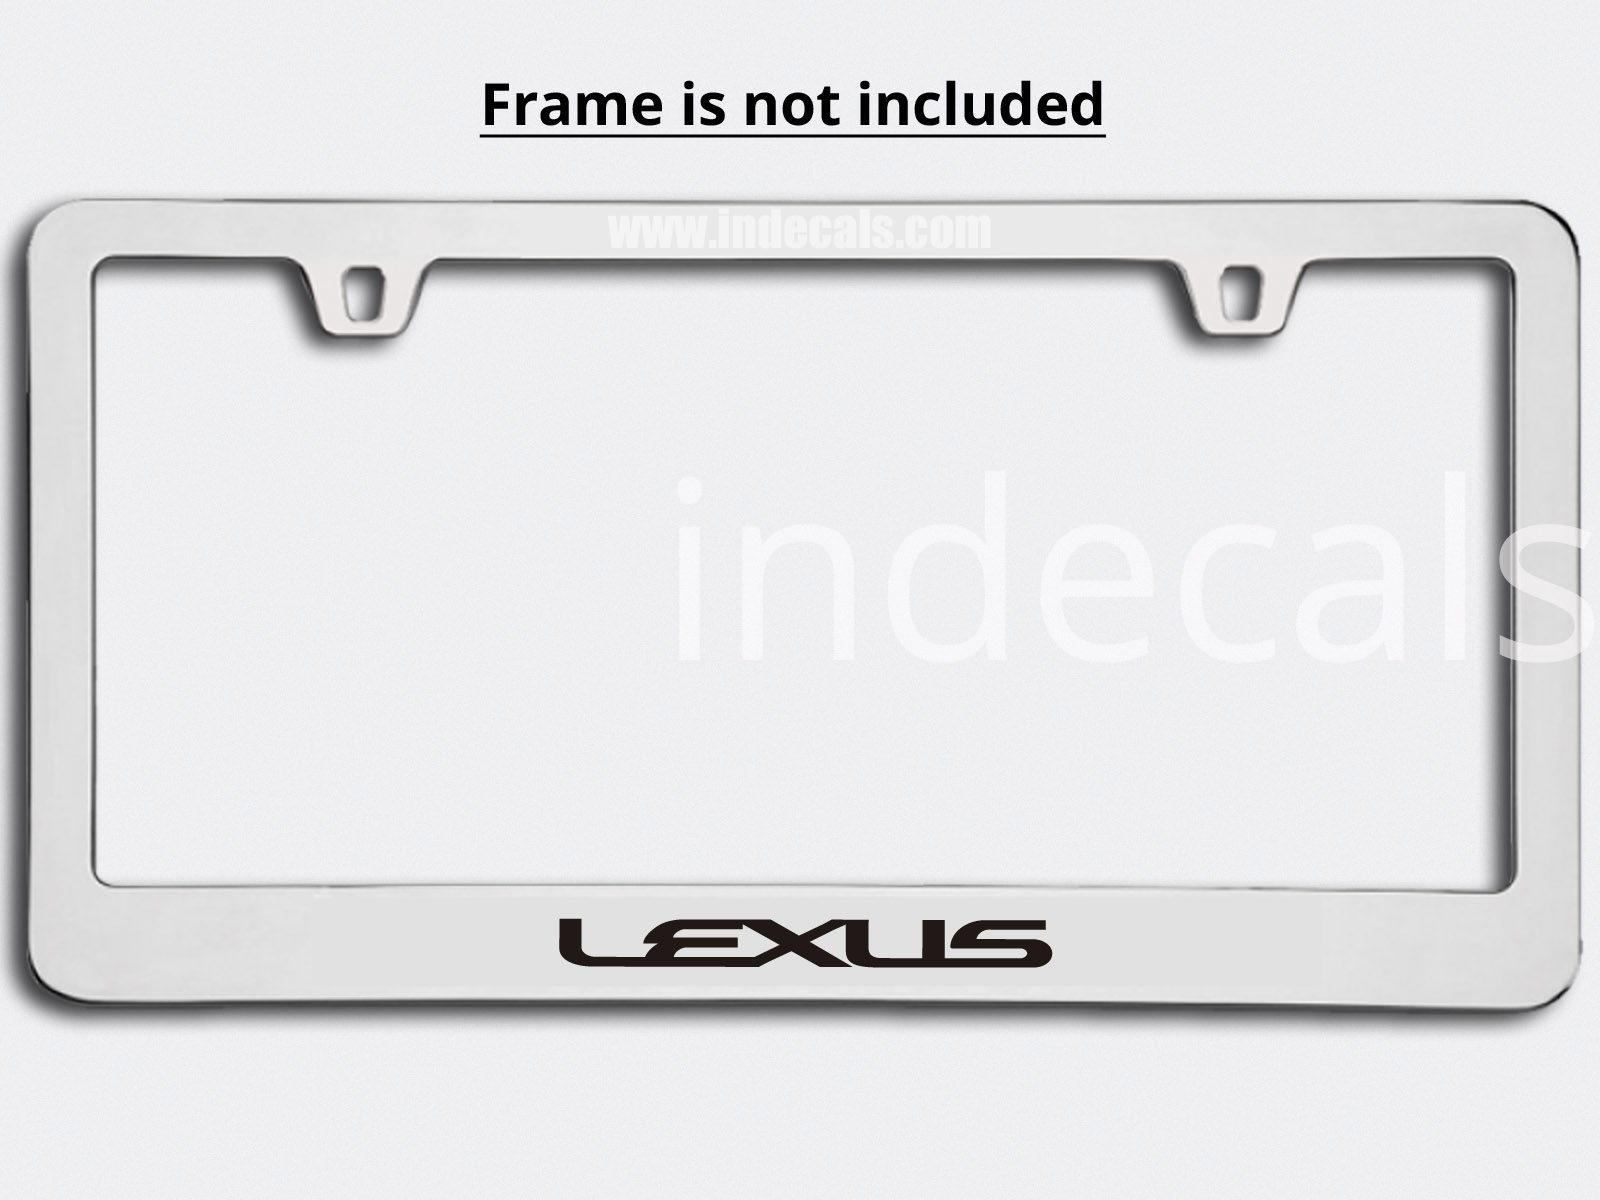 3 x Lexus Stickers for Plate Frame - Black